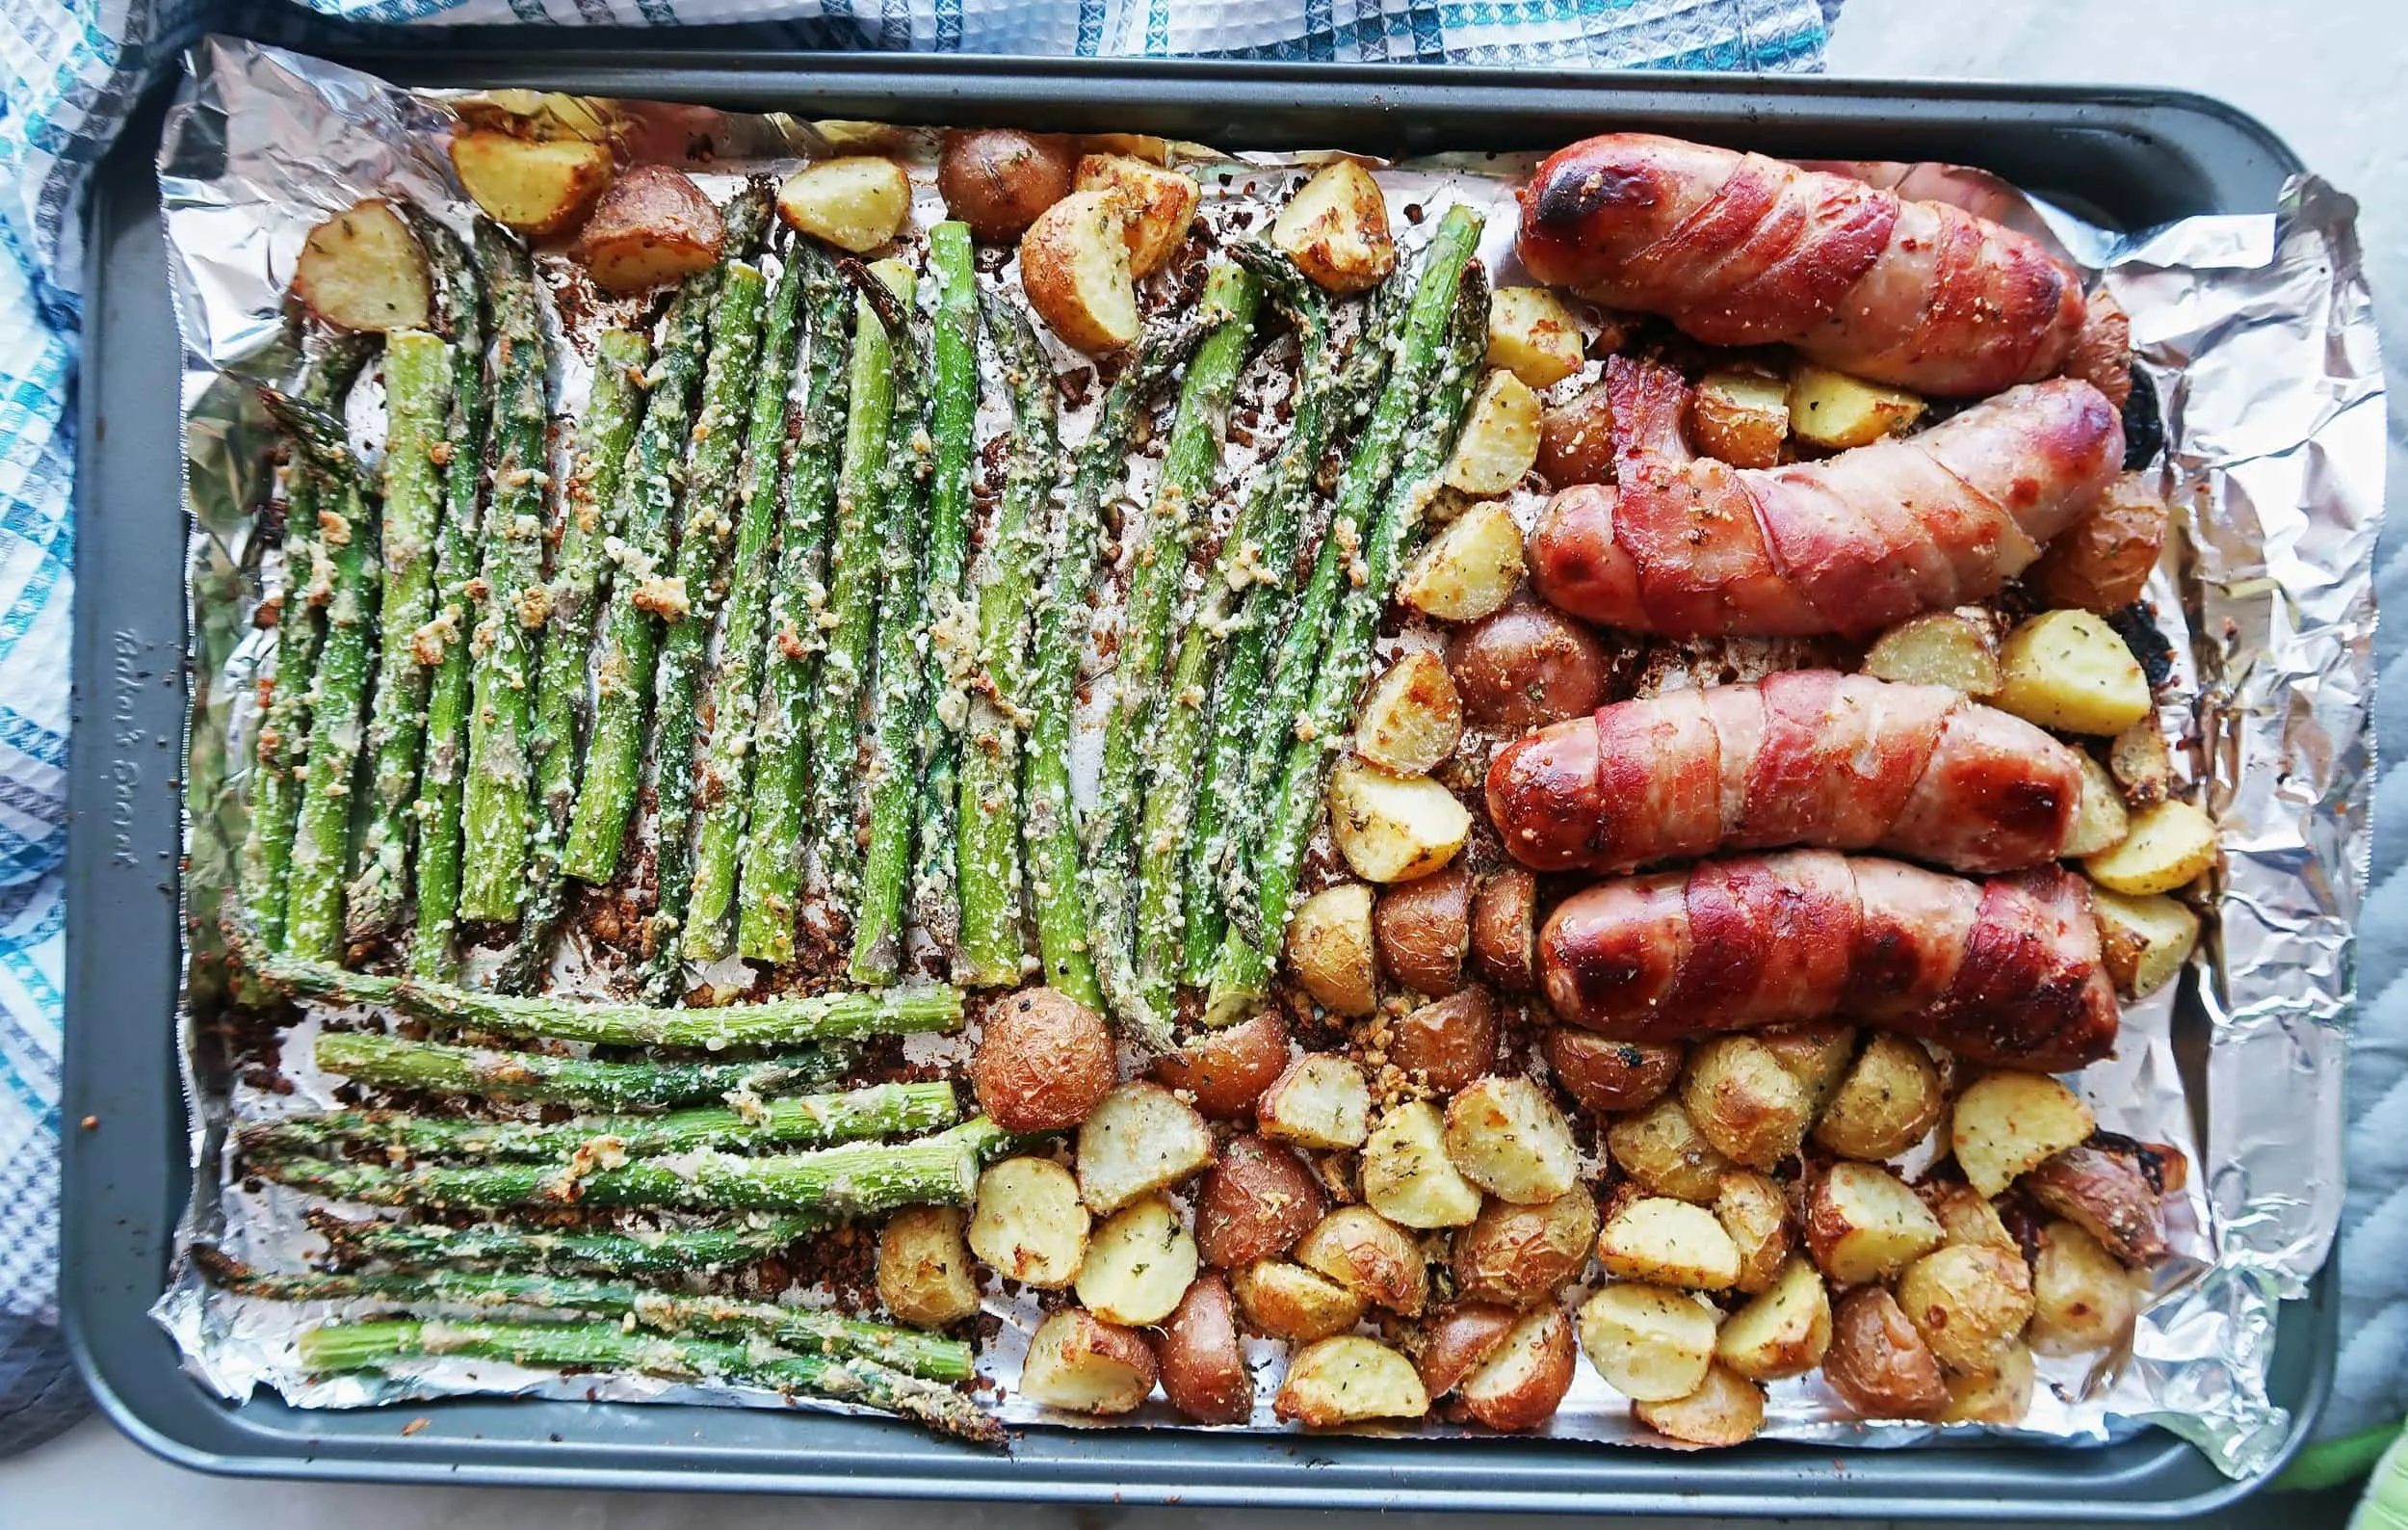 A sheet pan meal featuring roasted sausages, potatoes, and asparagus.